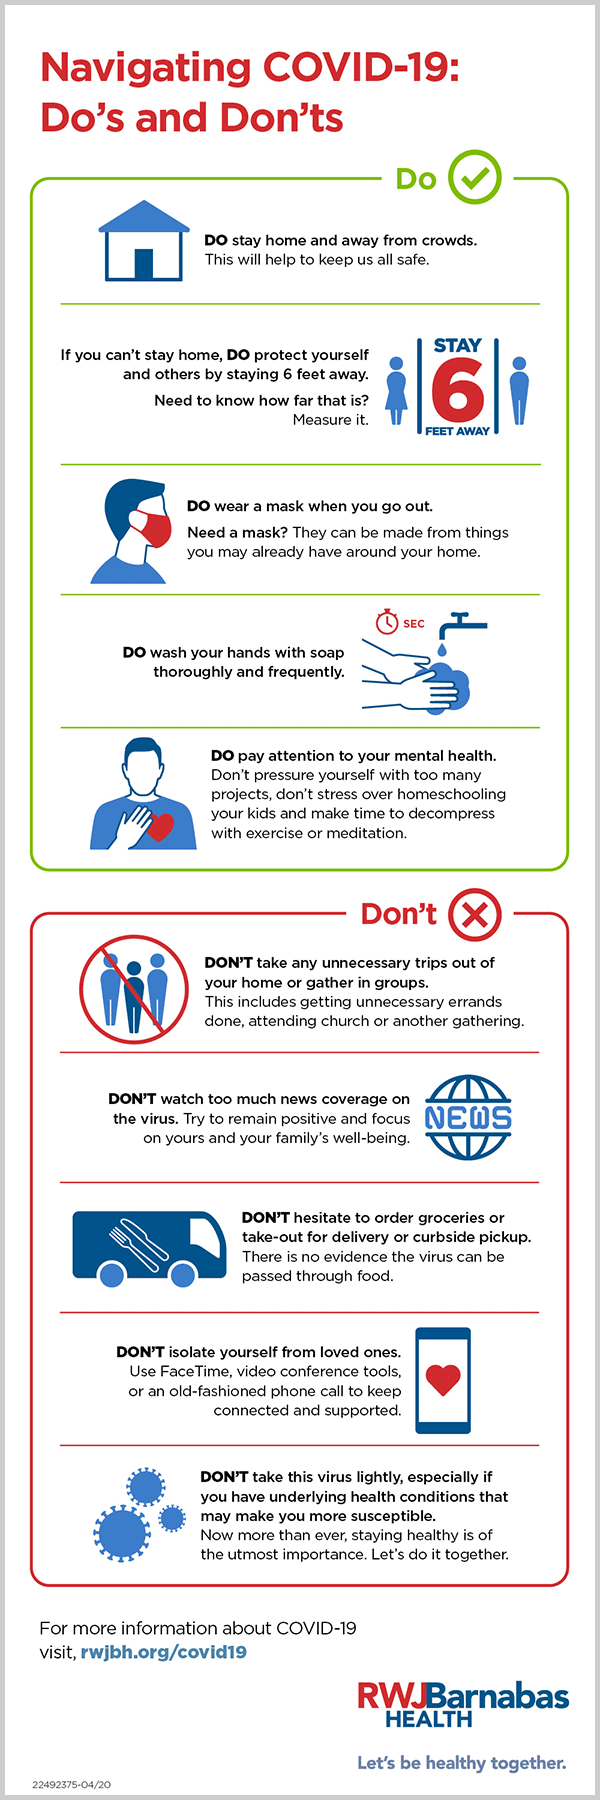 Navigating COVID-19: Do’s and Don’ts Infographic